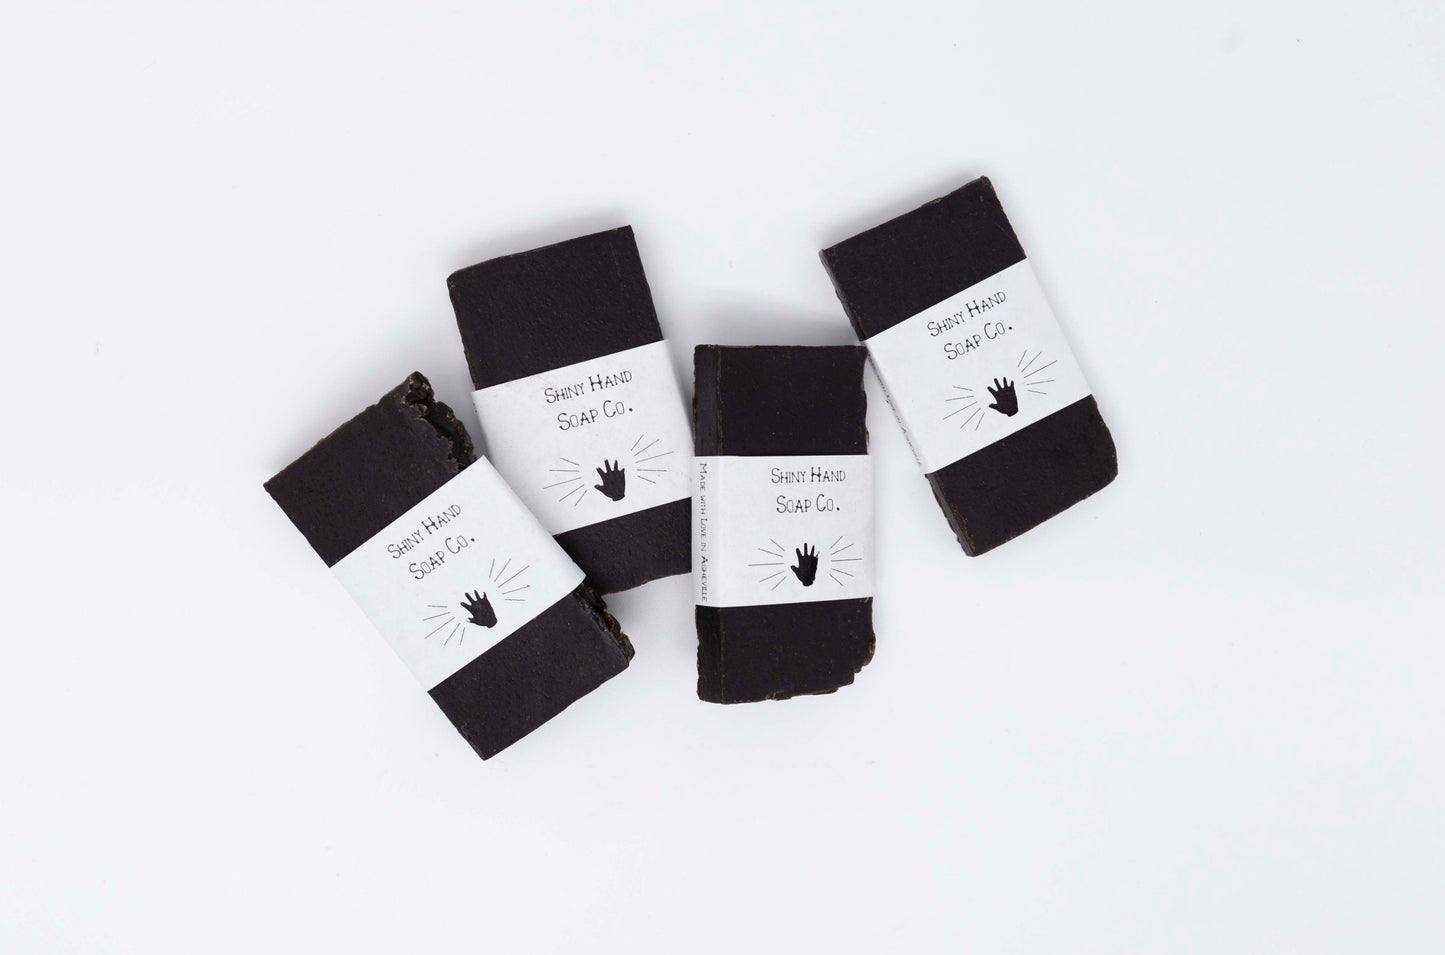 Four charcoal black midnight anise soap samples wrapped in crisp white recycled paper wrappers with a hand shaped cutout rest on a clean white backdrop.